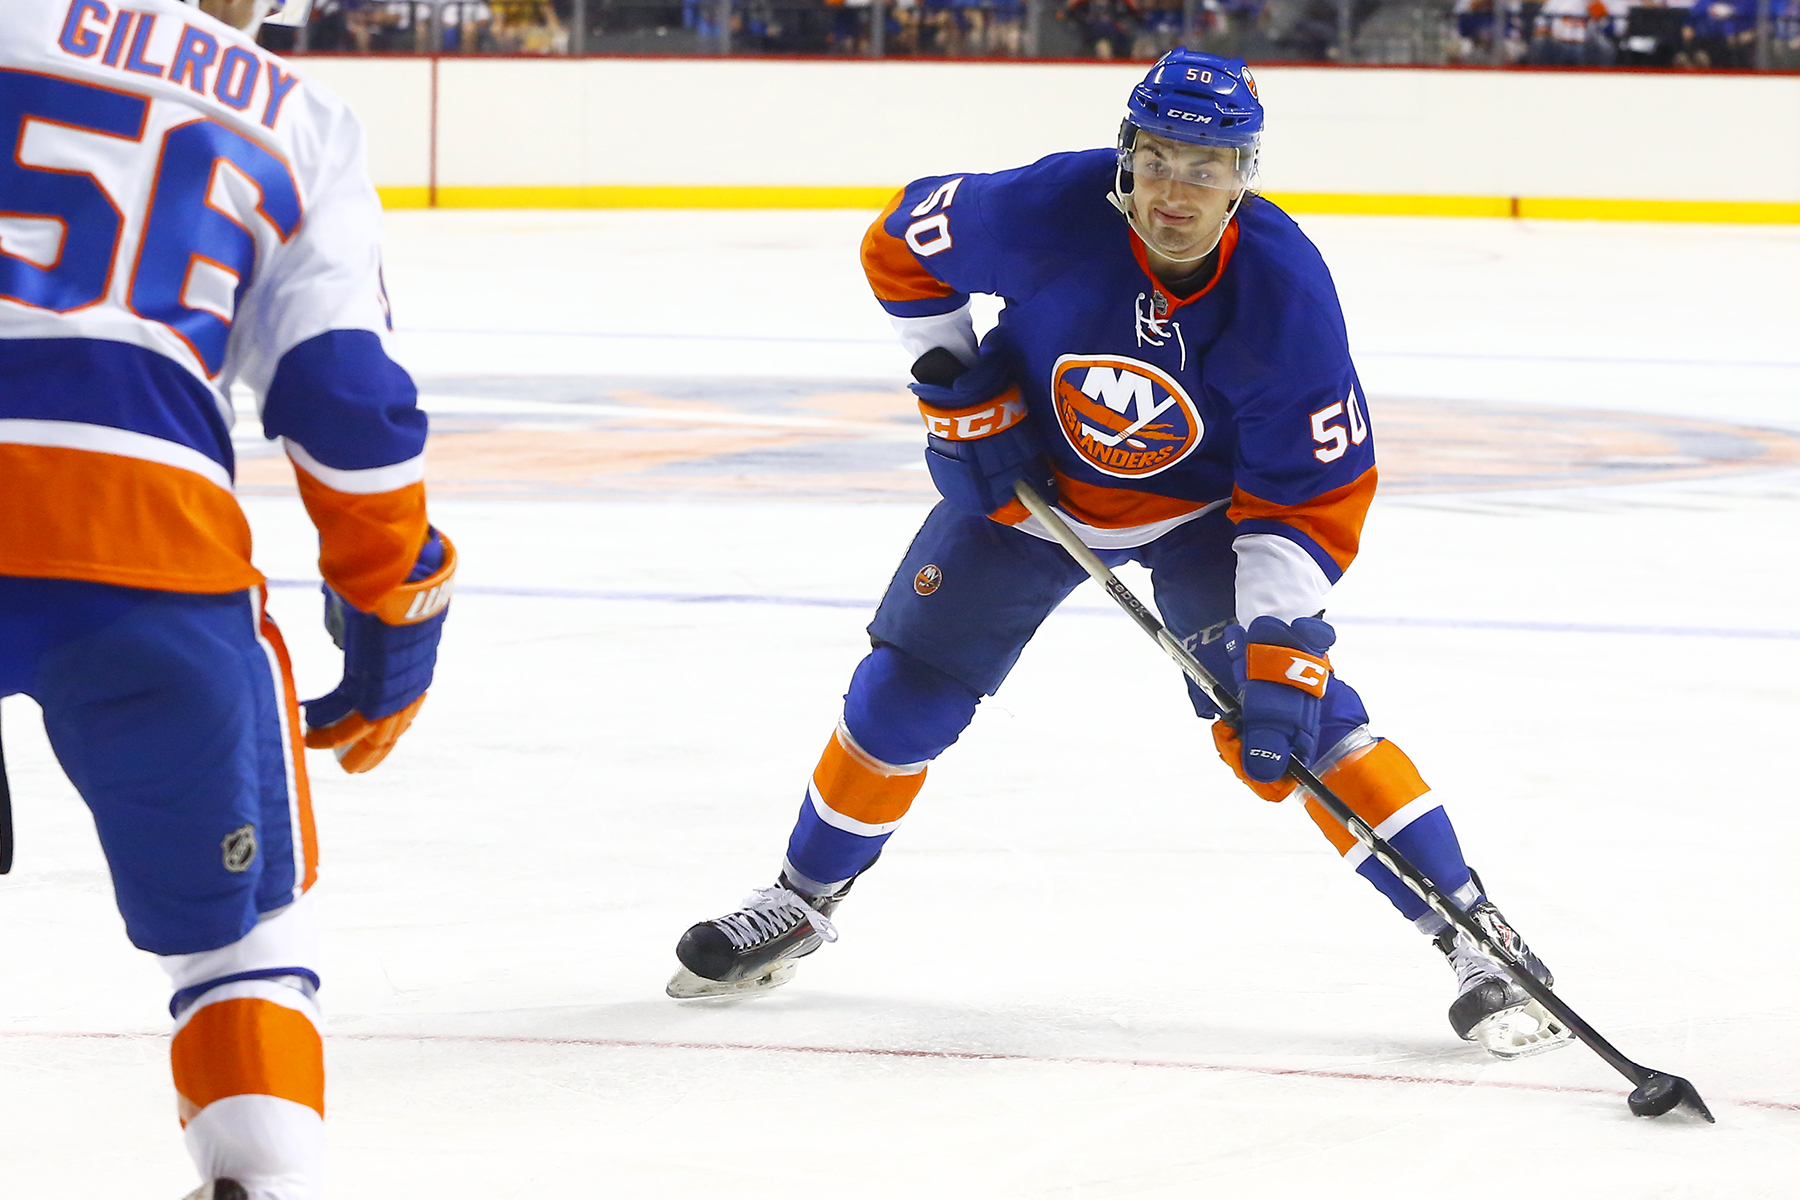 Isles’ Pelech Eager for NHL Opportunity